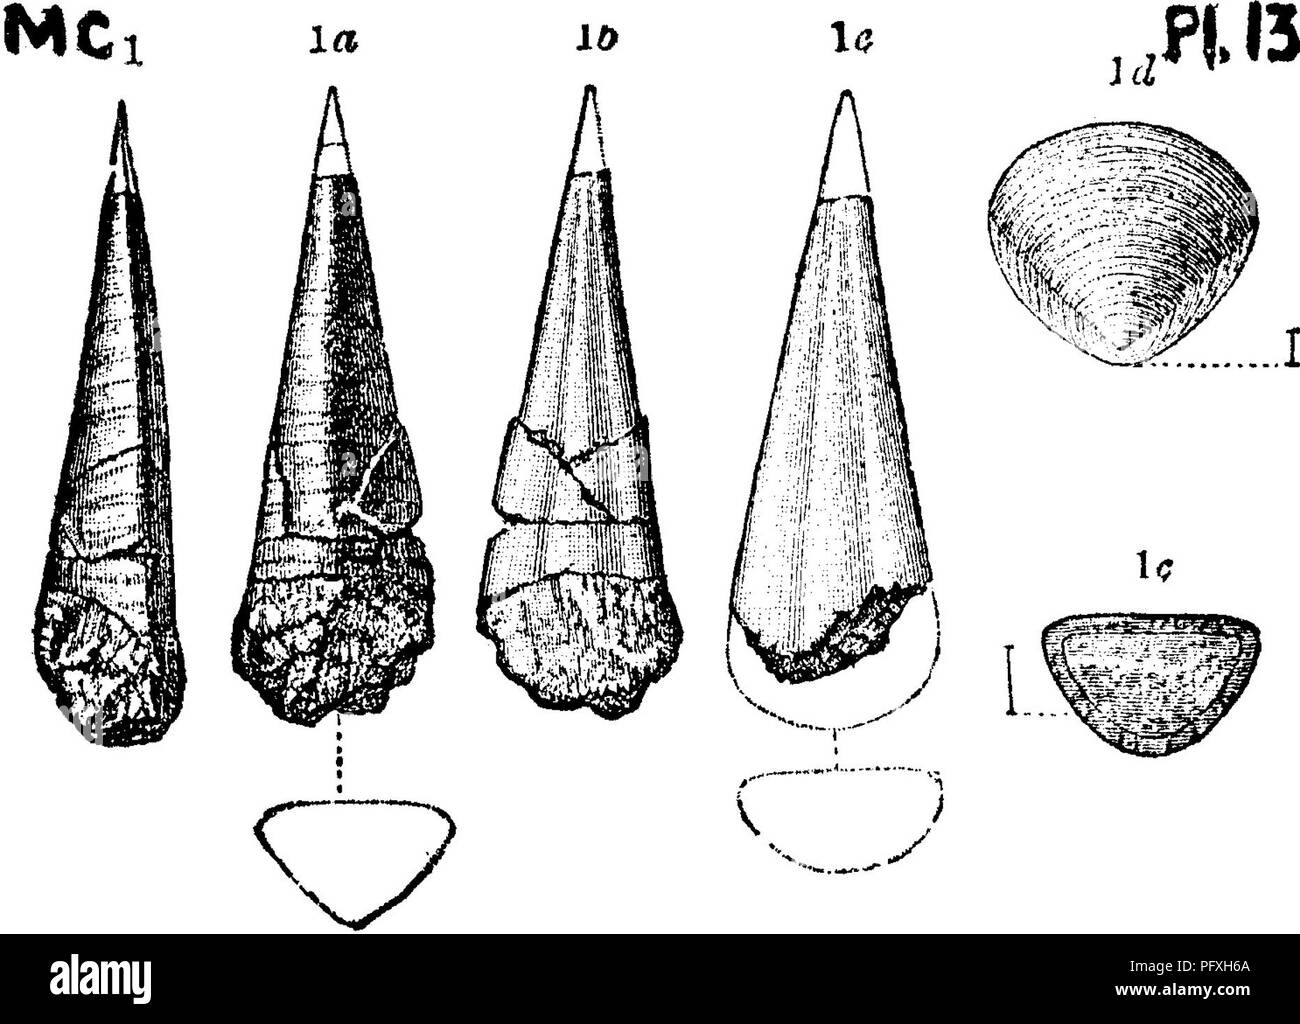 . A dictionary of the fossils of Pennsylvania and neighboring states named in the reports and catalogues of the survey ... Paleontology. Hyol. 294. times; fig. 6 5, o, cross sections; 6(^, lid (operculum) enlarged twice ; 6 e, lid enlarged Ave times ; fig. 6 f. small broad speci- men, enlarged-five times.-Lower Cambrian (Conglomerate lime- stone) formation at Troy, N. Y., and at Bic and St. Simon, Canada. L. (7.—See foot-note to page 1S4, Hyolithes billingsi. (Salterella ohtusa Billings, Geol. Vt. Pal. Foss. Syoli- j^^P(» 15 thes primordialis ? White, 100th, Mer. Inv. Foss. lY, 1, figs. 5 a—e  Stock Photo